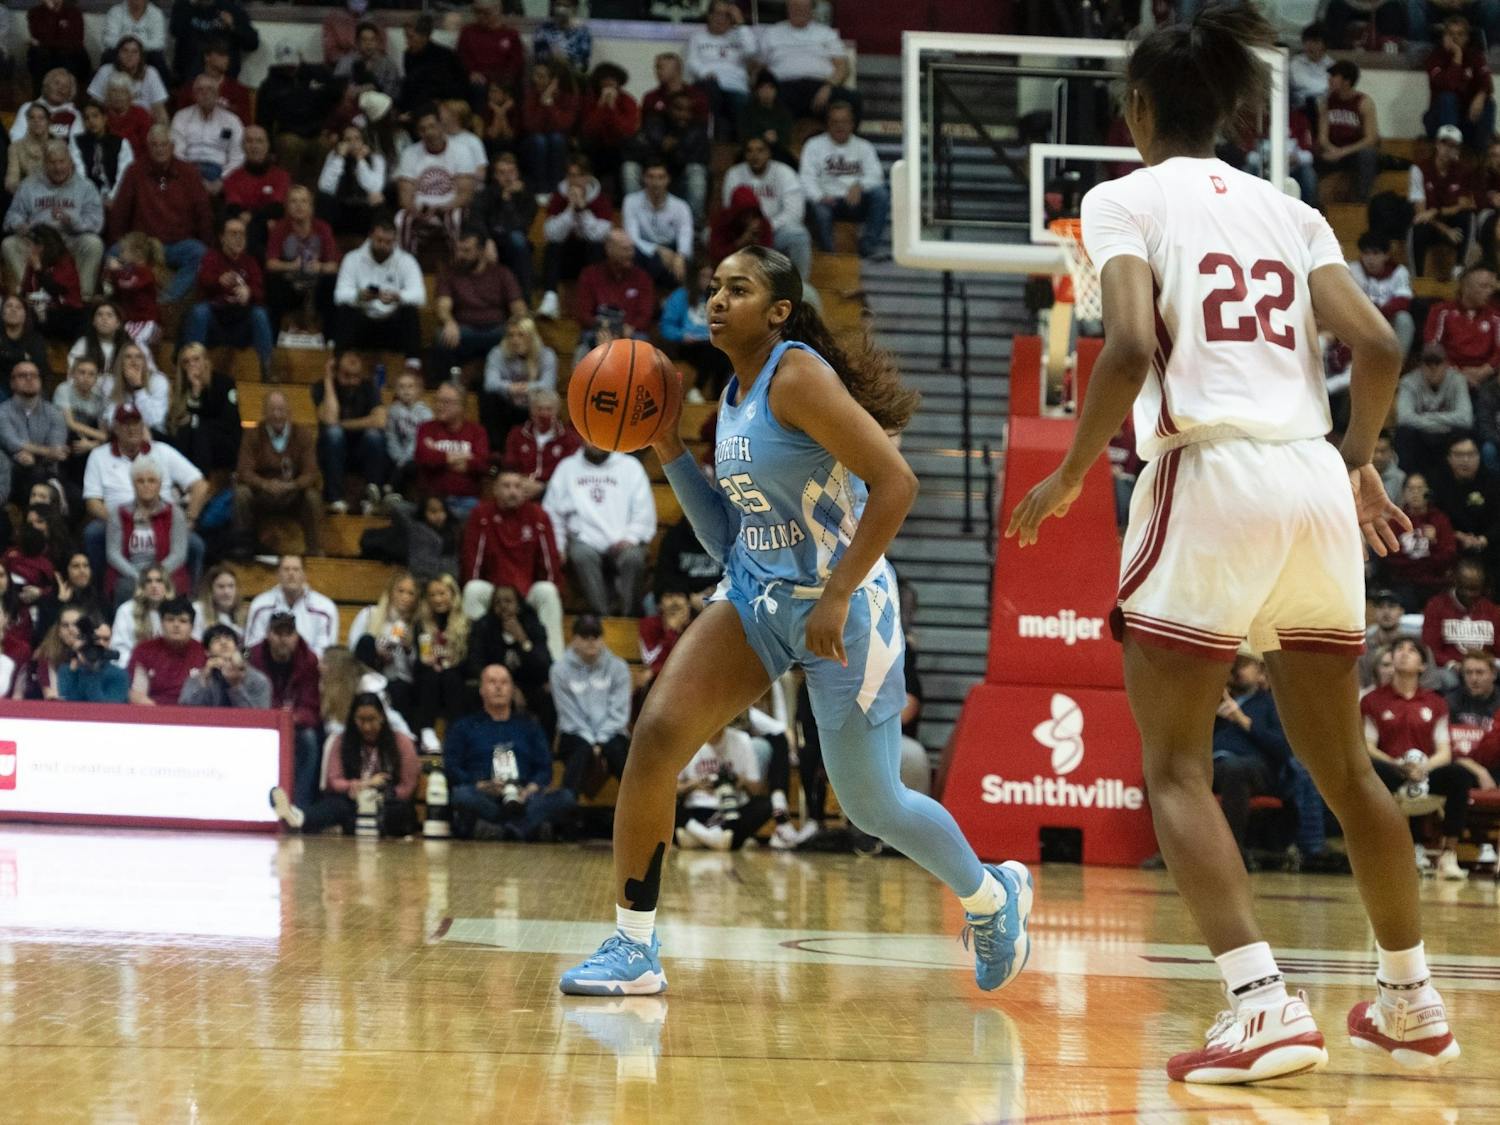 Junior guard, Deja Kelly (25) dribbles the ball at the Simon Skjodt Assembly Hall at Indiana University on Thursday, December 1, 2022. UNC lost 87-63. Photo Courtesy of UNC Athletic Communications